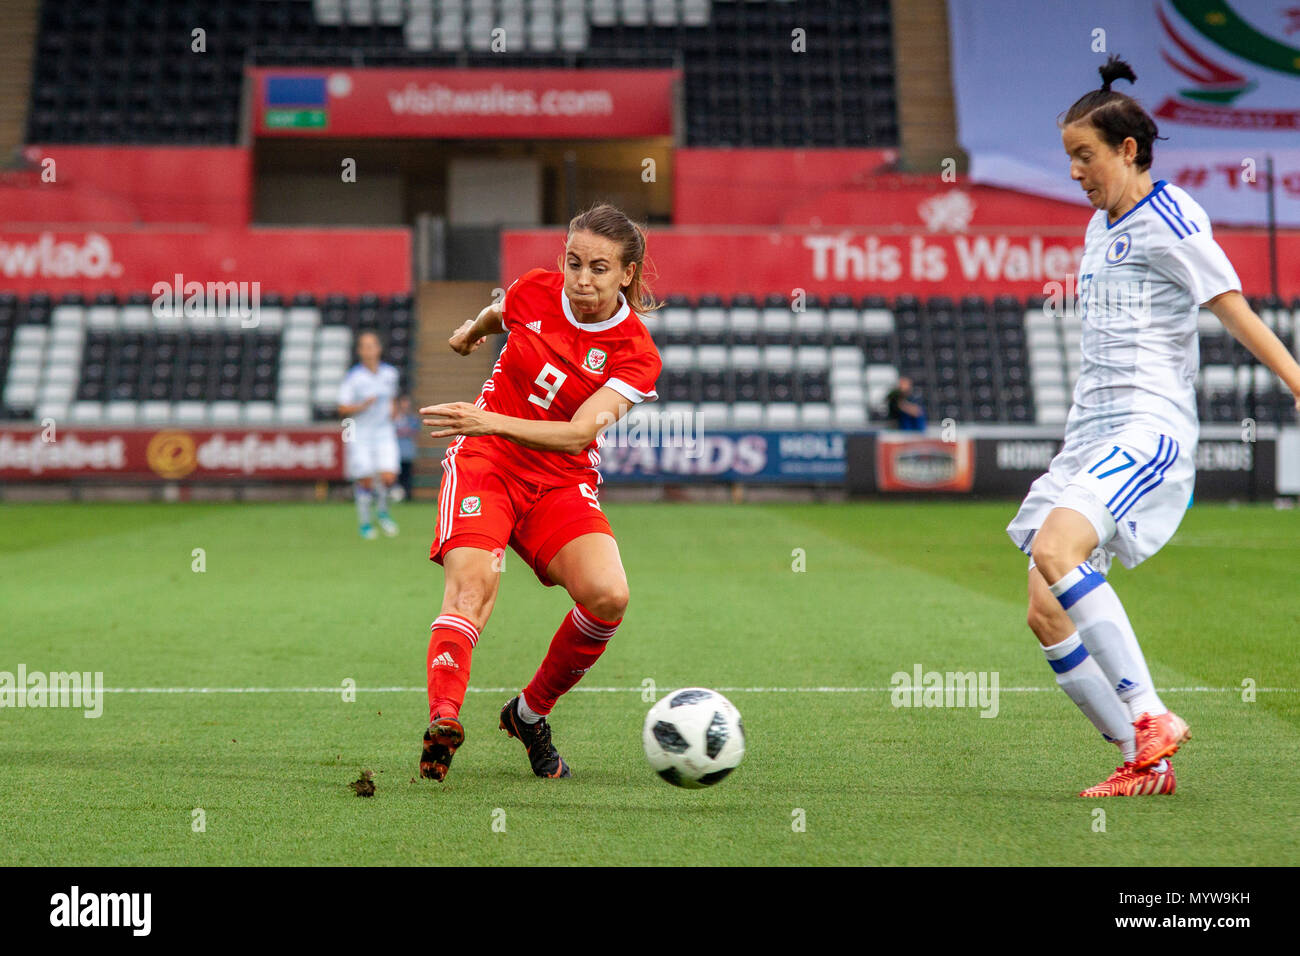 Swansea, Wales, UK. 7th June, 2018. Kayleigh Green scores against Bosnia-Herzegovina at the Liberty Stadium. Lewis Mitchell/Alamy Live News. Stock Photo